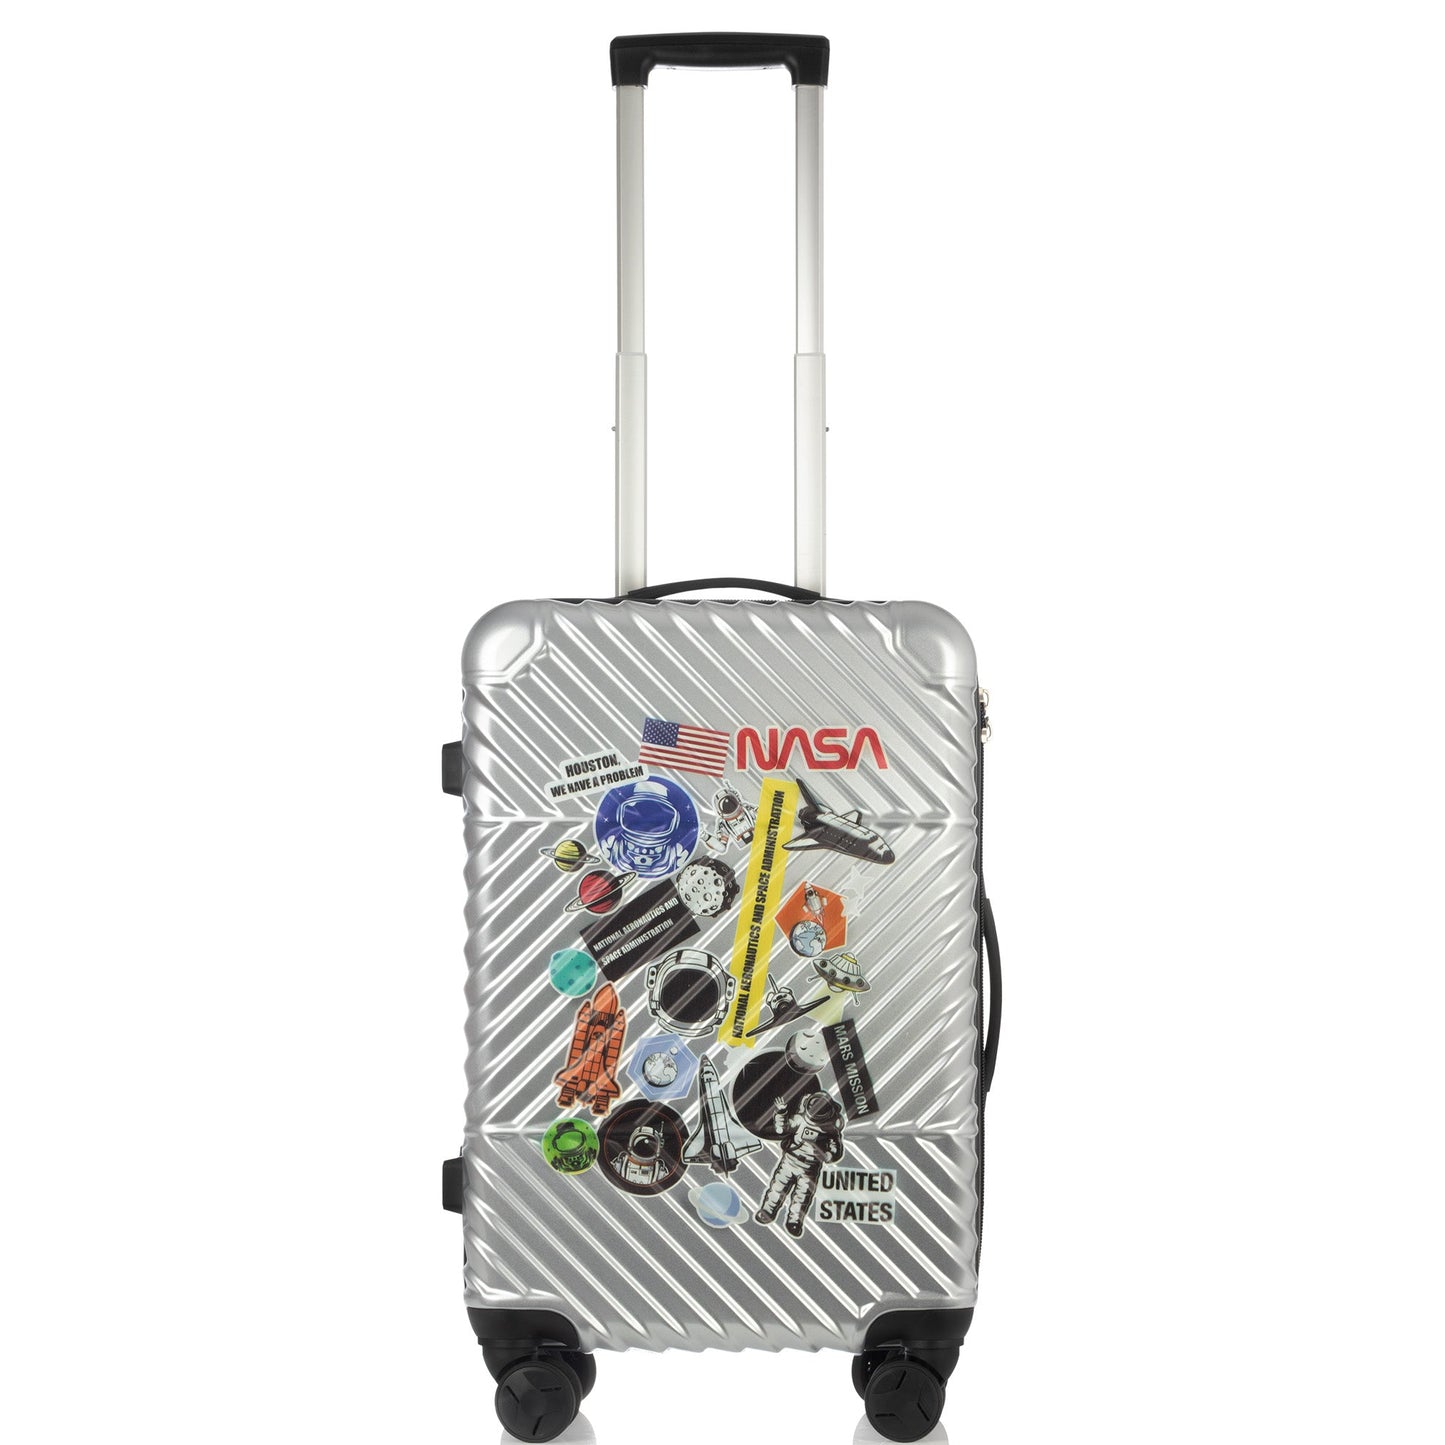 Mission Patches Collection Silver Luggage (21/26/29")